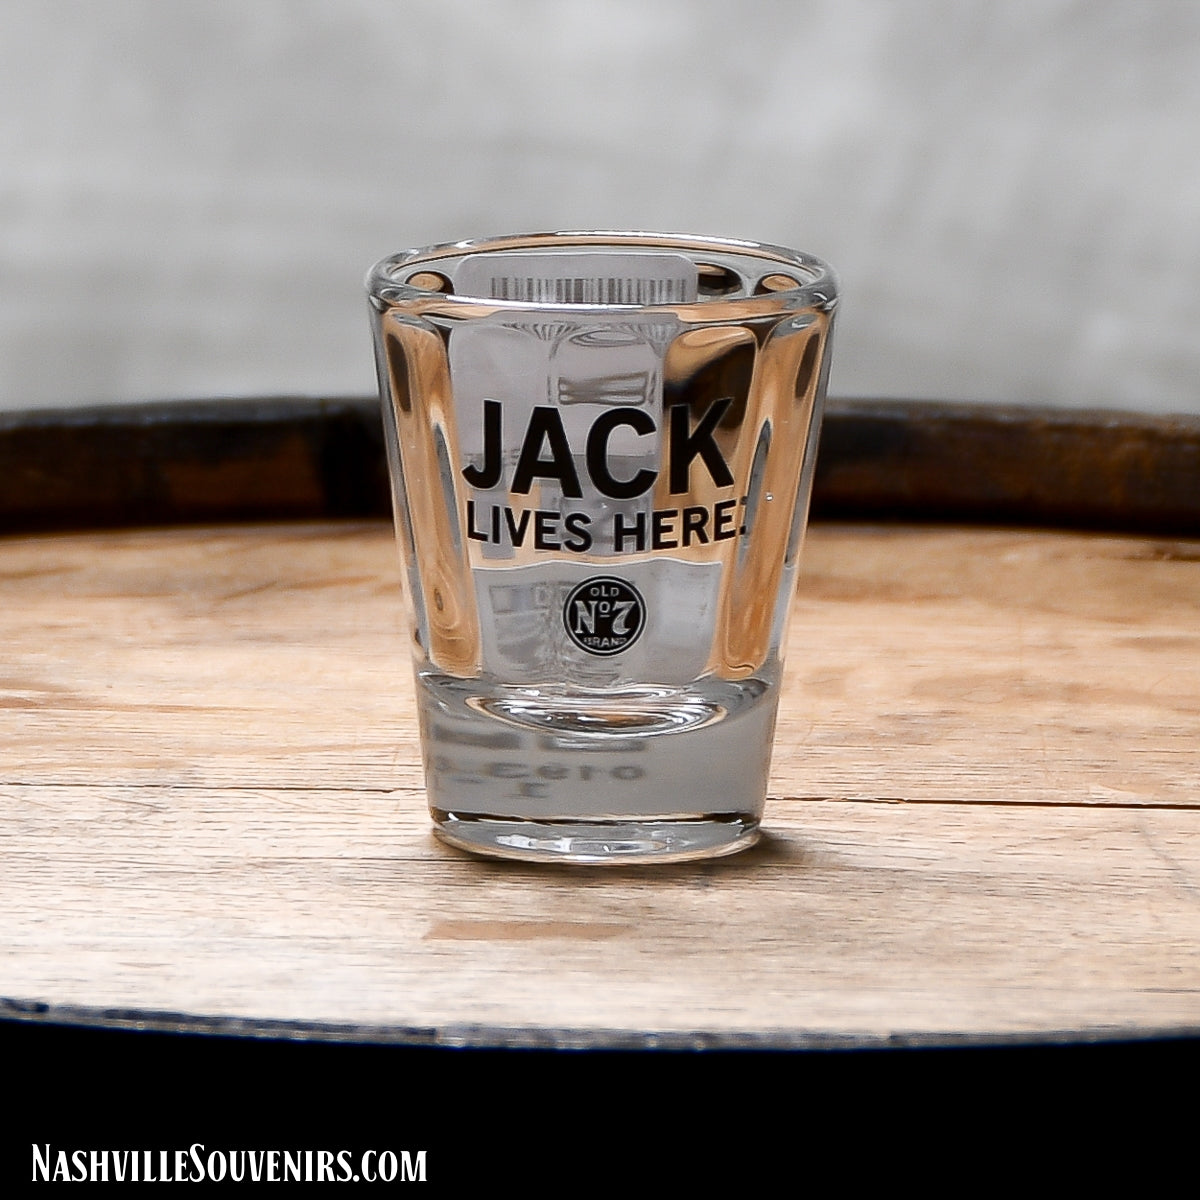 Officially licensed Jack Daniels Jack Lives Here Shot Glass. FREE SHIPPING on all US orders over $75!